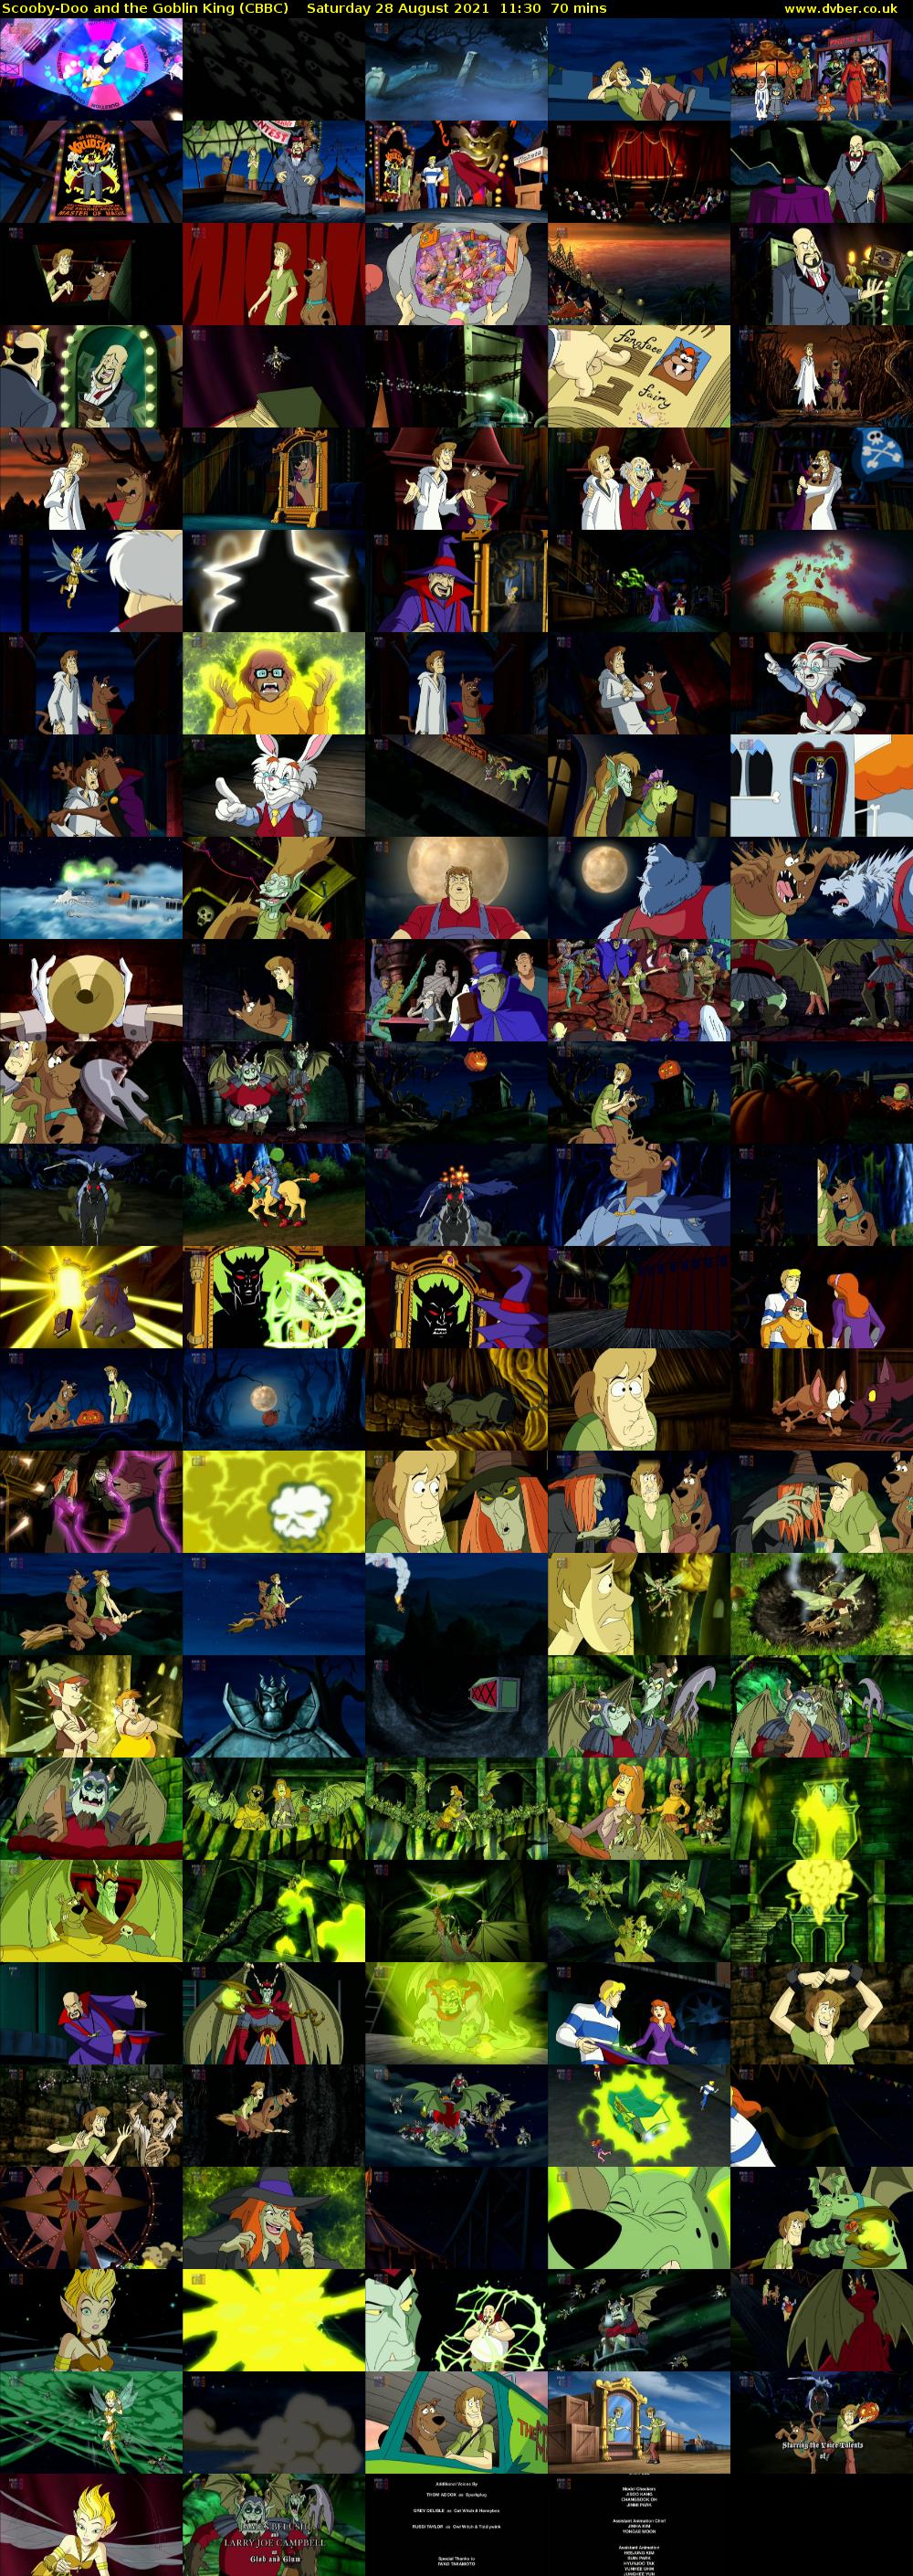 Scooby-Doo and the Goblin King (CBBC) Saturday 28 August 2021 11:30 - 12:40